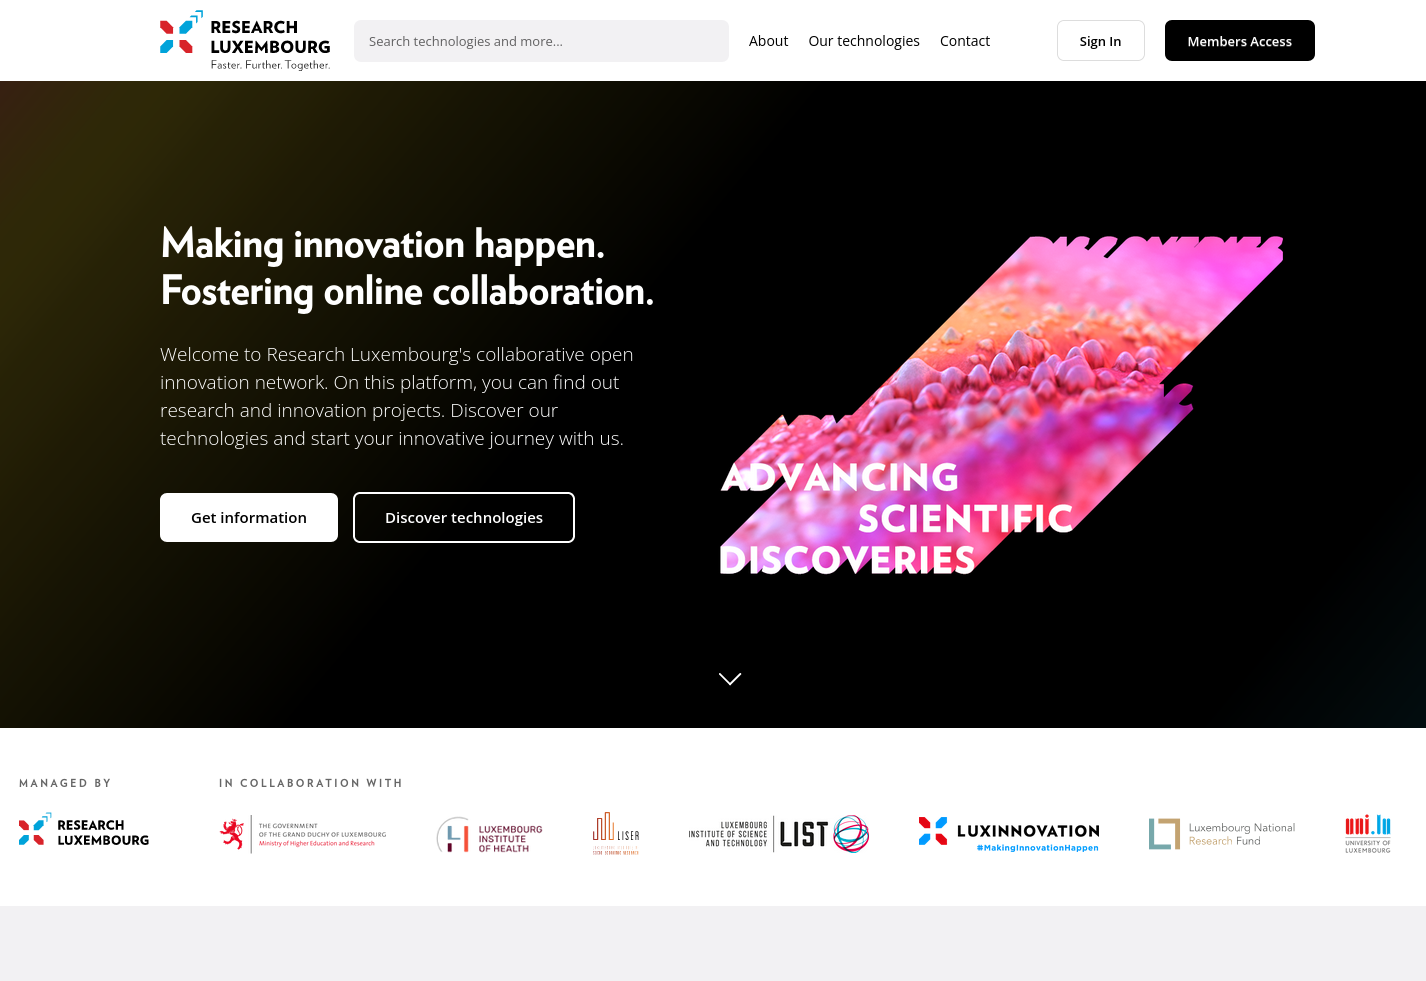 Research Luxembourg's collaborative open innovation network